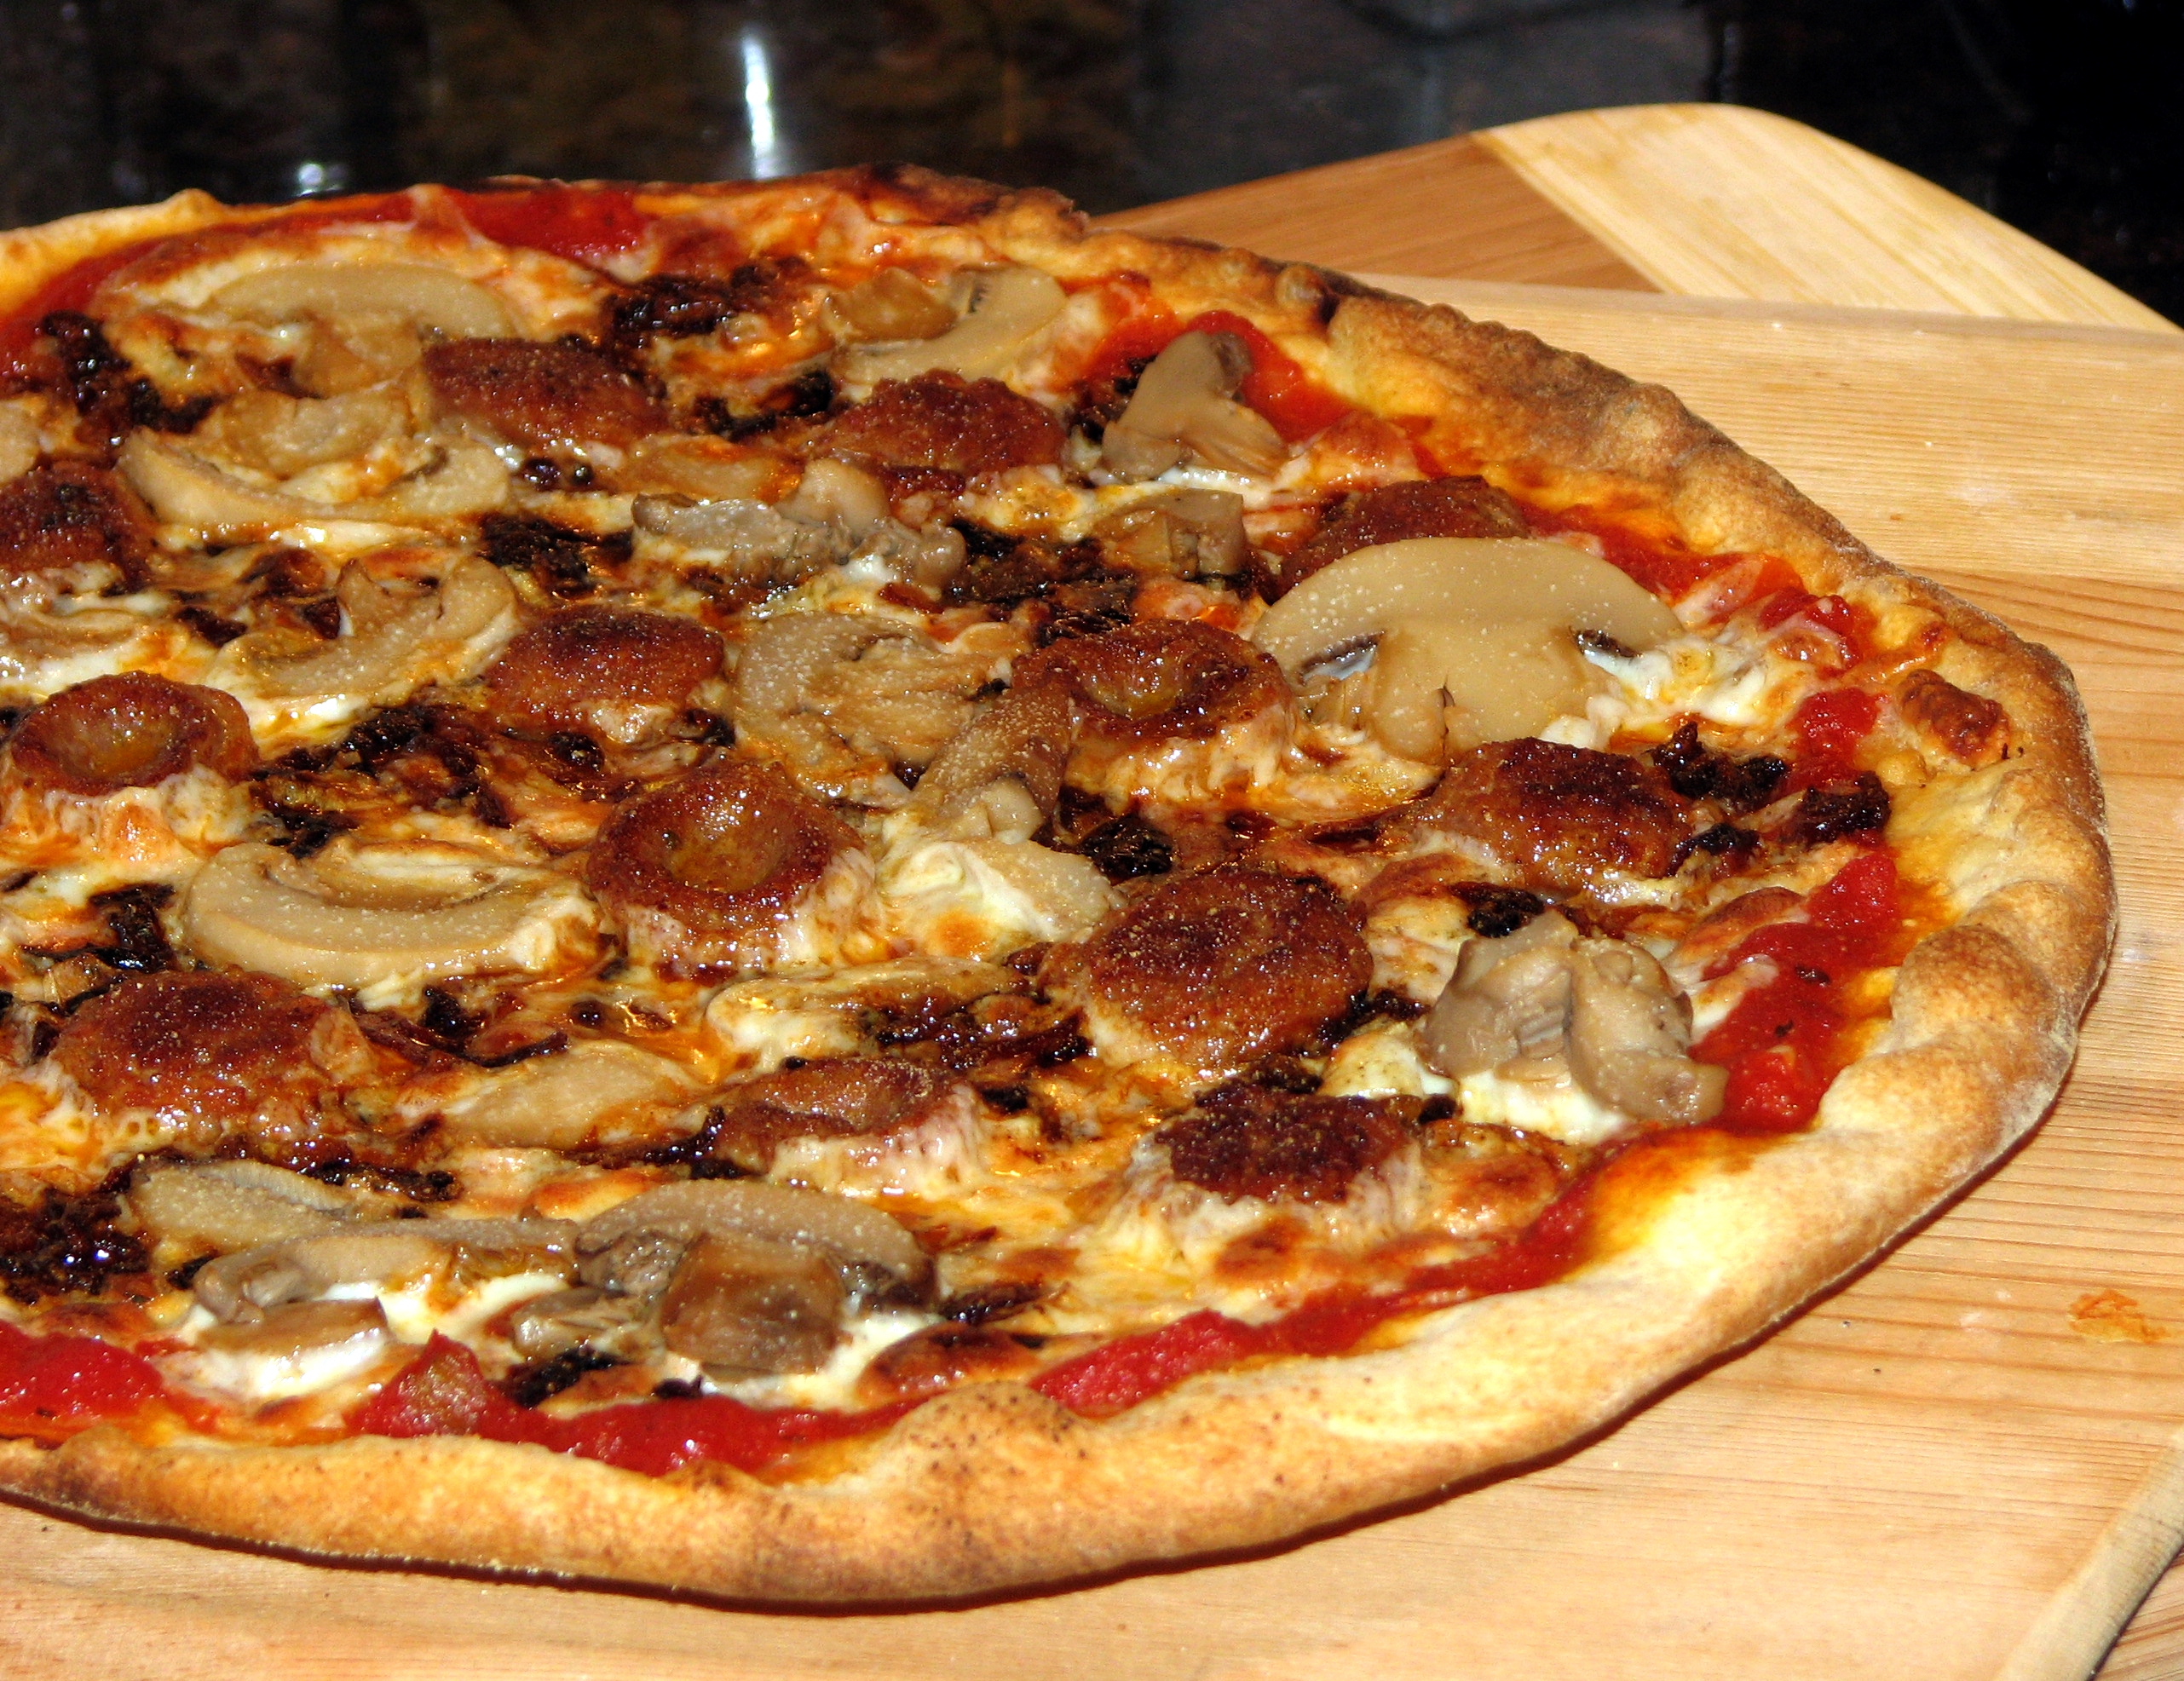 Pizza-SMO-1.21.10-cropped.jpg